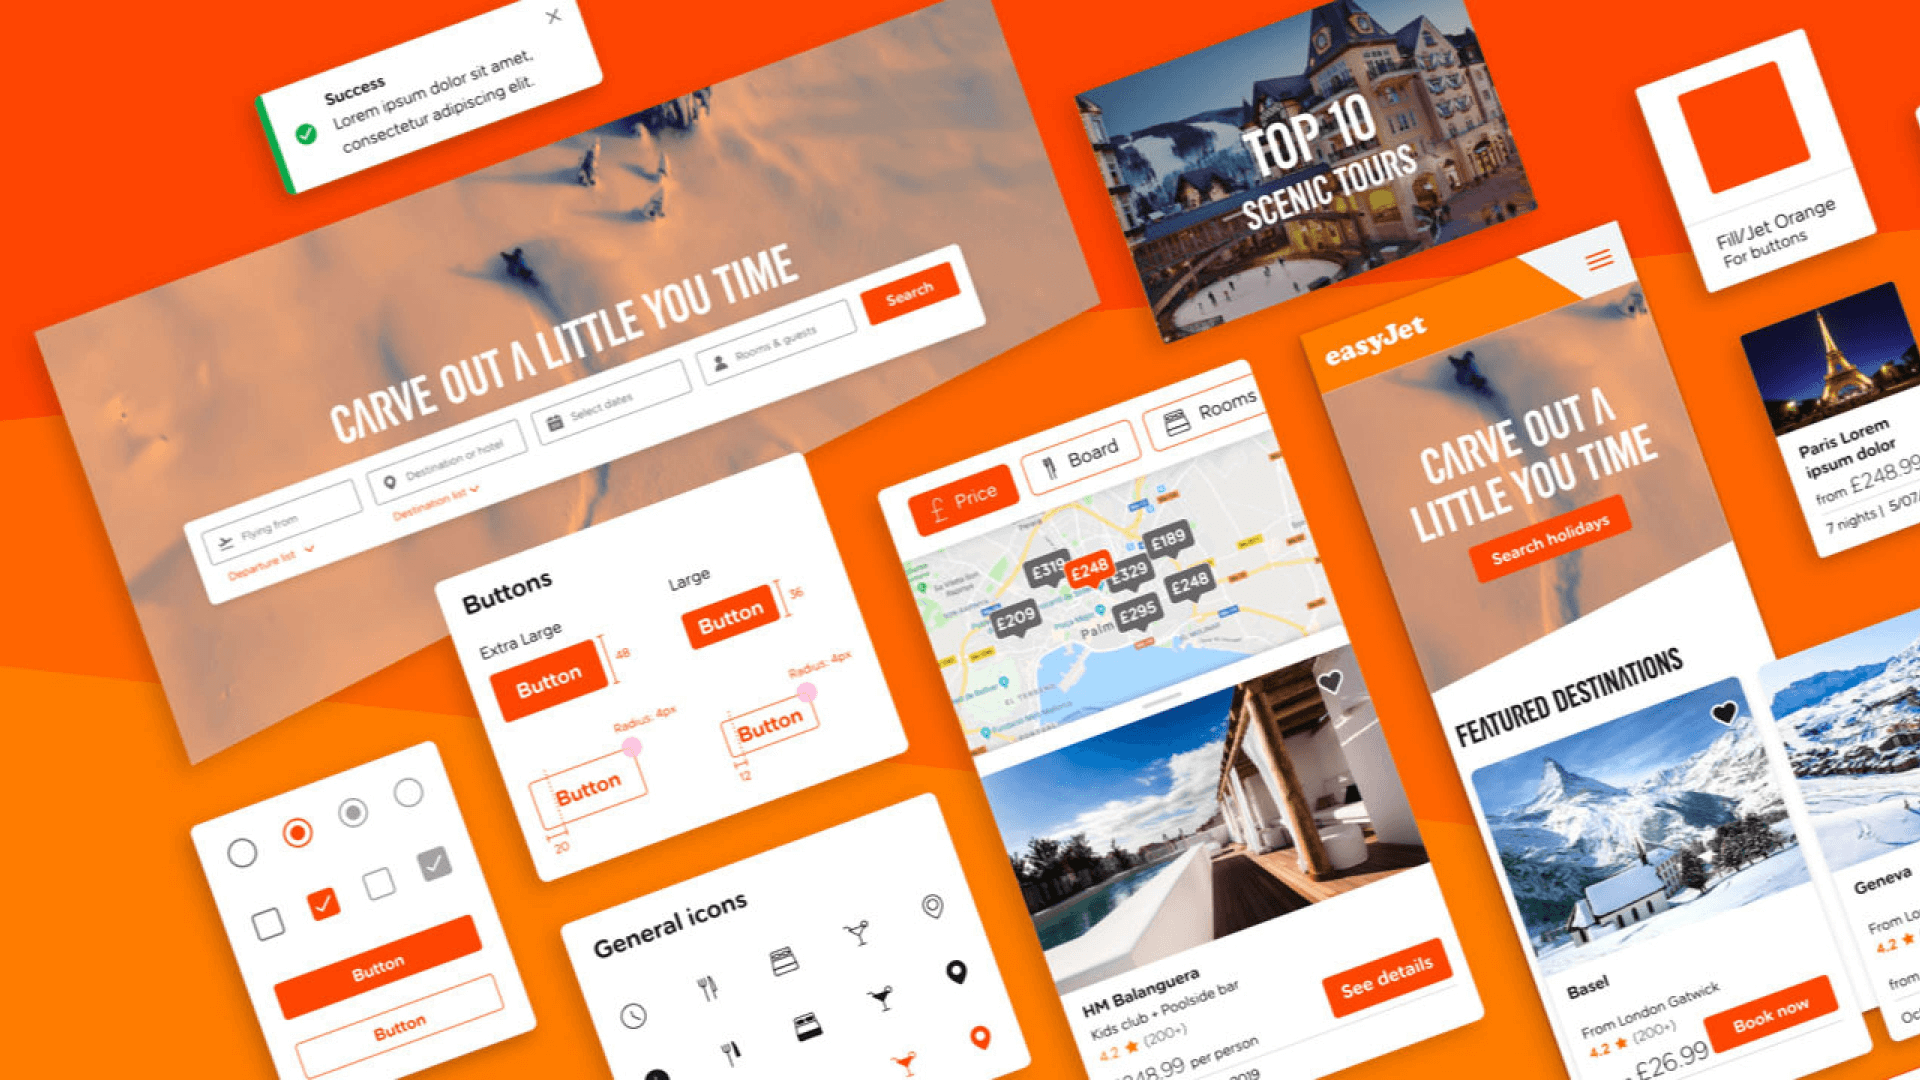 Snippets from easyJet websites